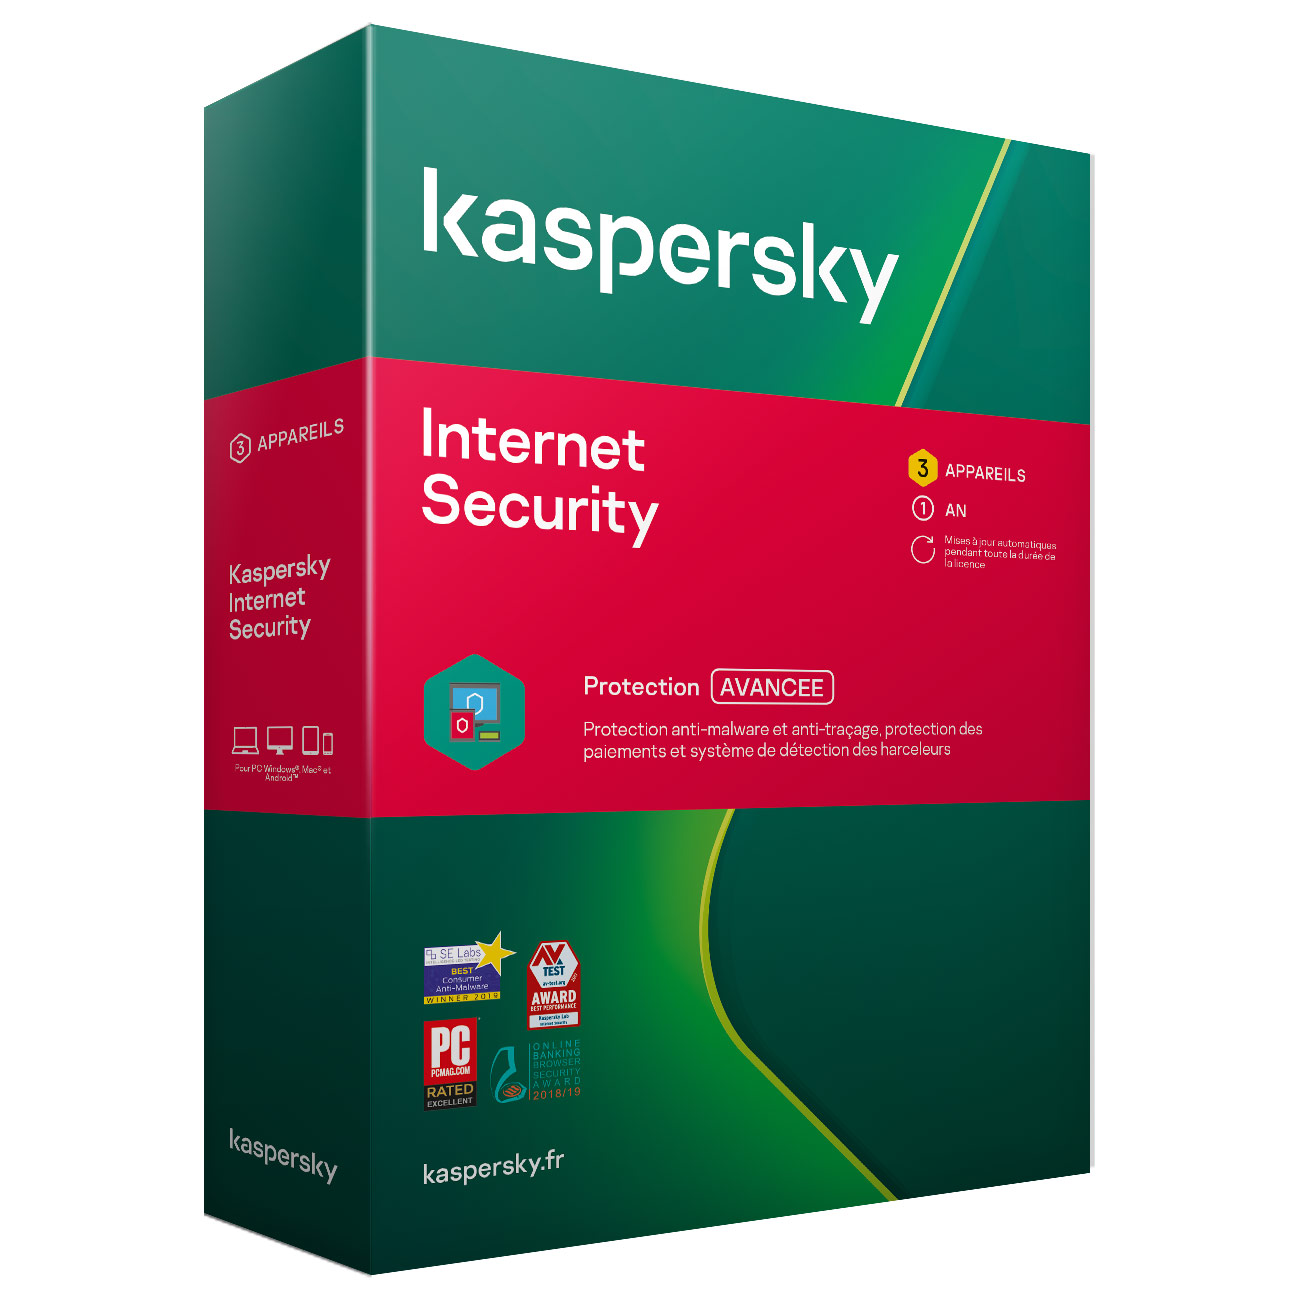 kaspersky-total-security-2017-3-devices-for-1-year-deals-pc-world